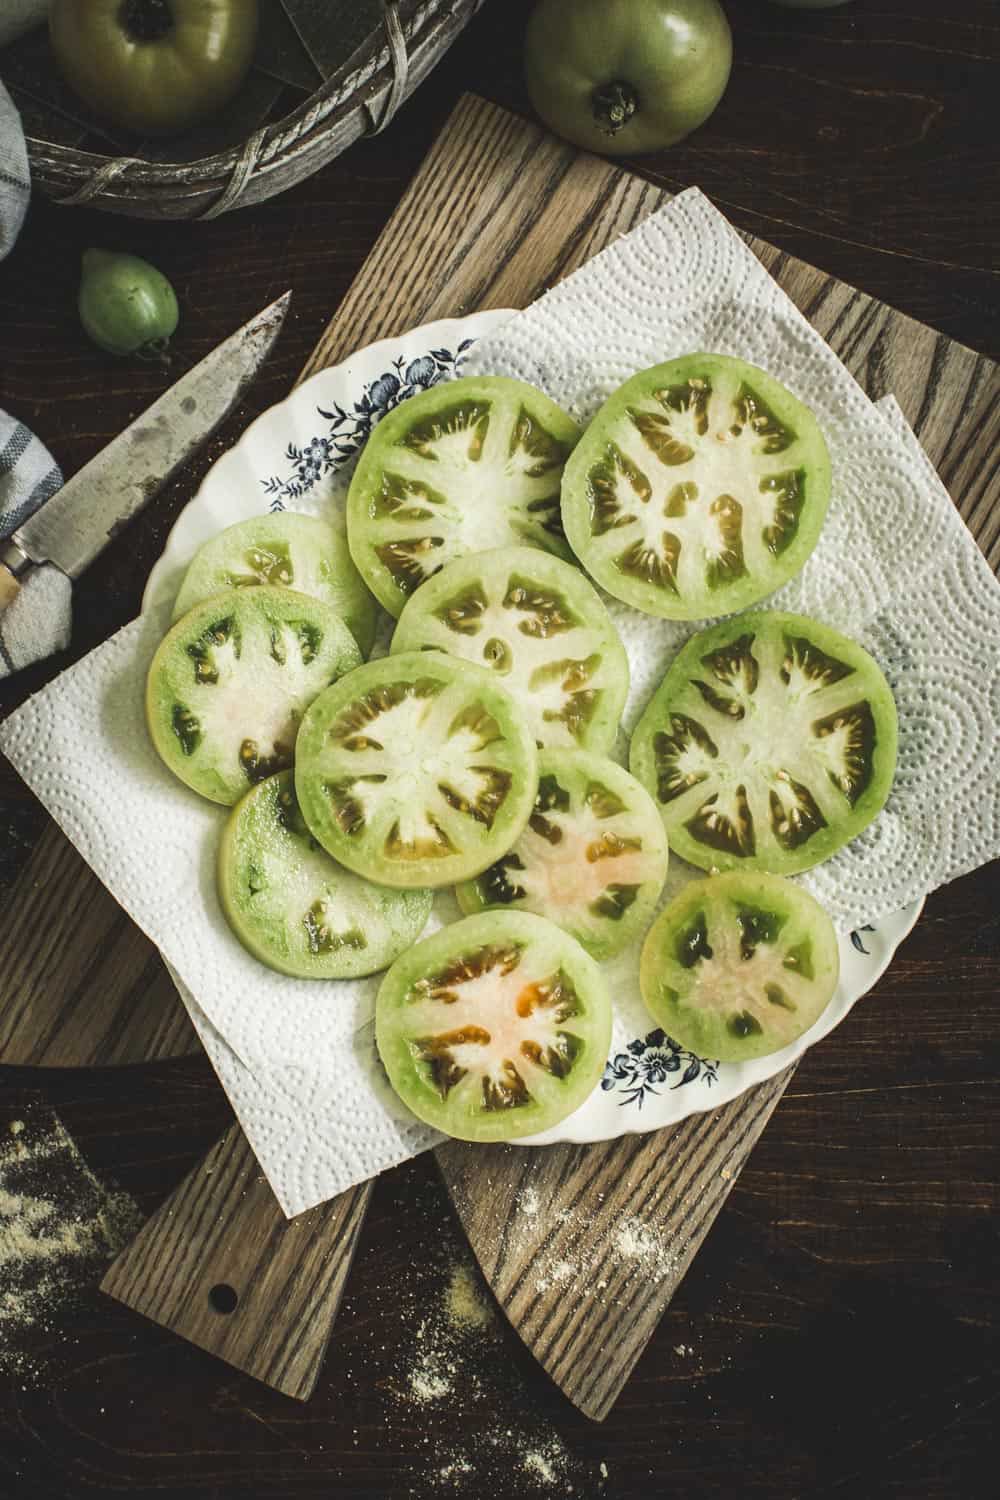 Sliced green tomatoes salted on top of paper towels on plate.